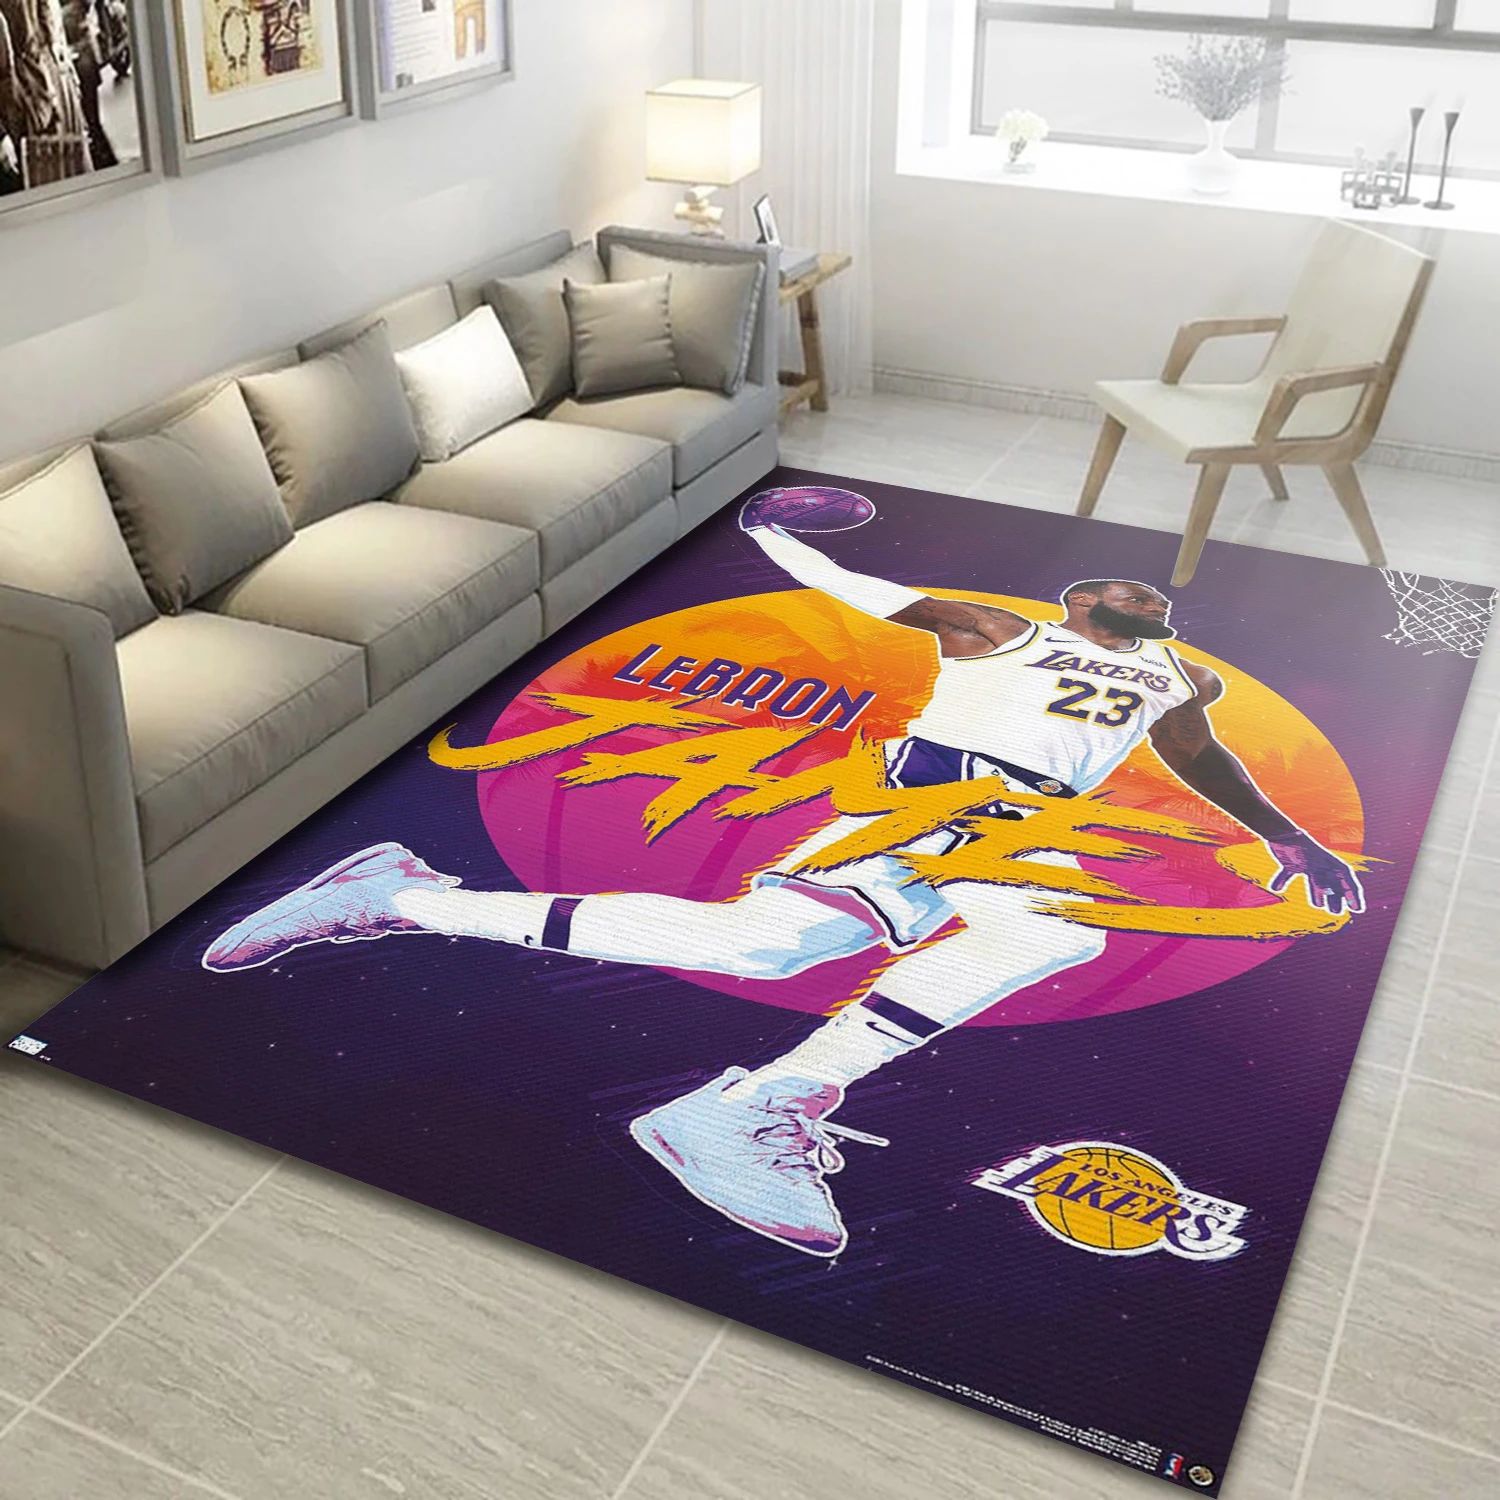 Lebron James Los Angeles Lakers NBA Area Rug For Christmas, Living Room Rug - Room Decor - Indoor Outdoor Rugs